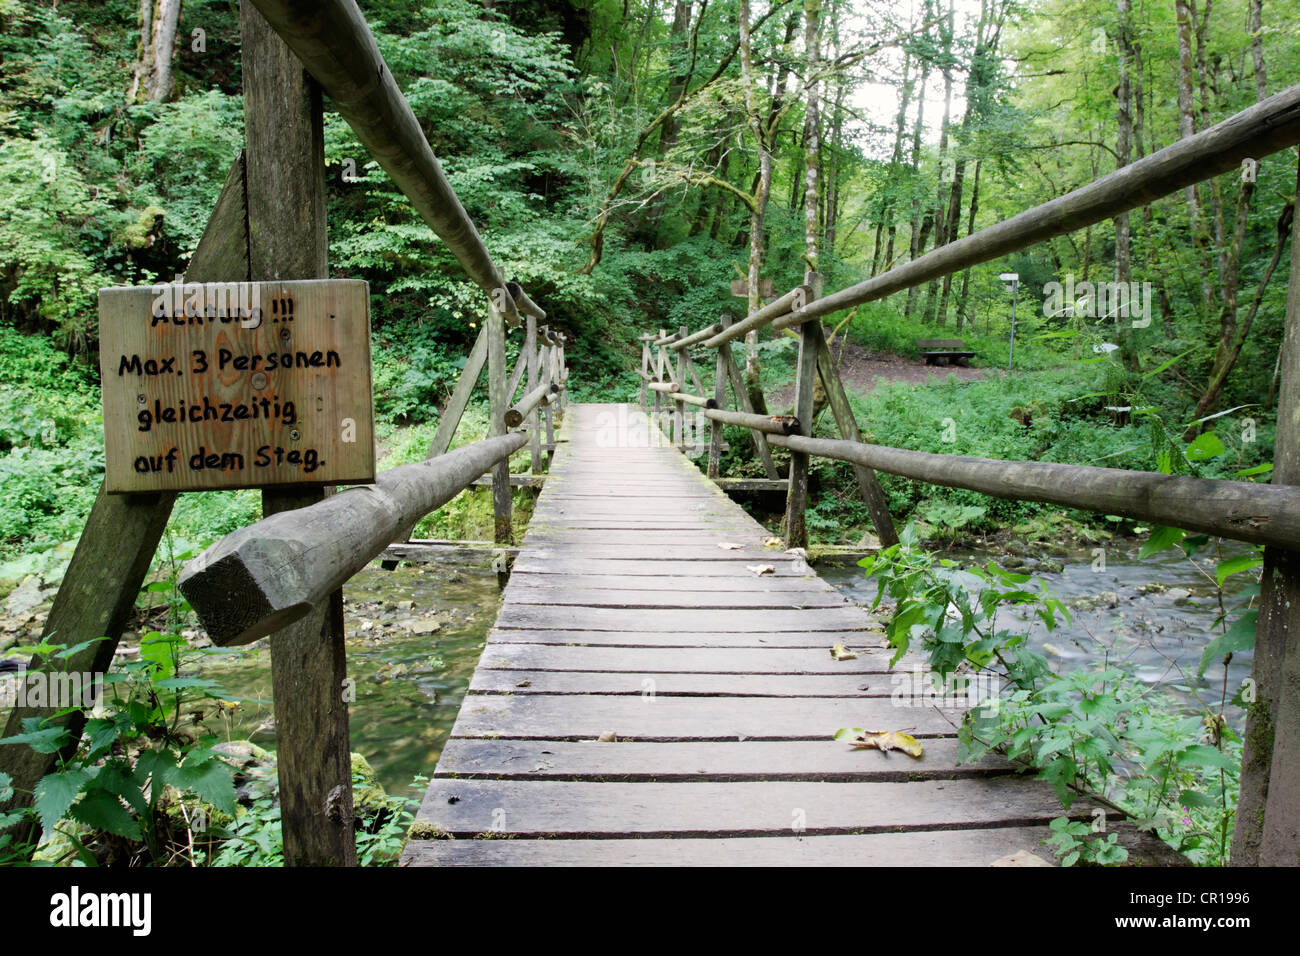 A not very sustainable wood bridge in the Gauchachschlucht gorge, a side gorge of the Wutachschlucht nature reserve Stock Photo